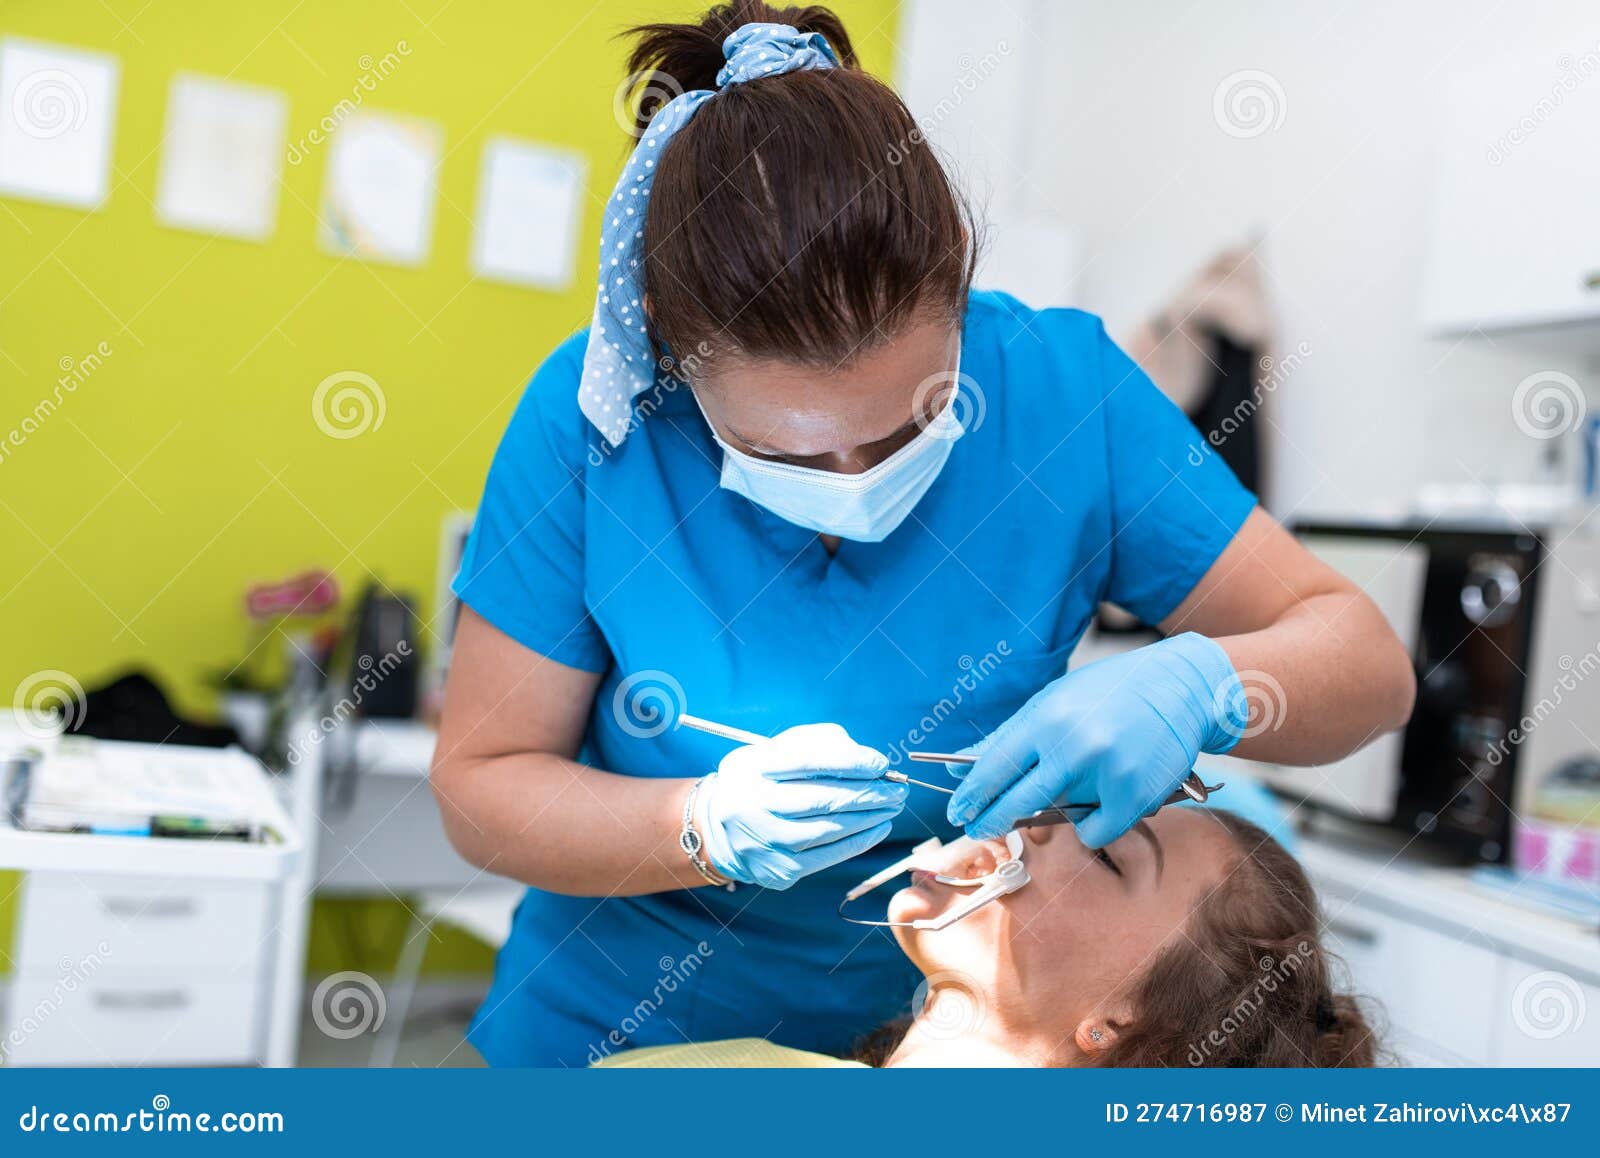 dentist appointment at a dental clinic, placing braces locks on the teeth and pulling the archwire to fix it